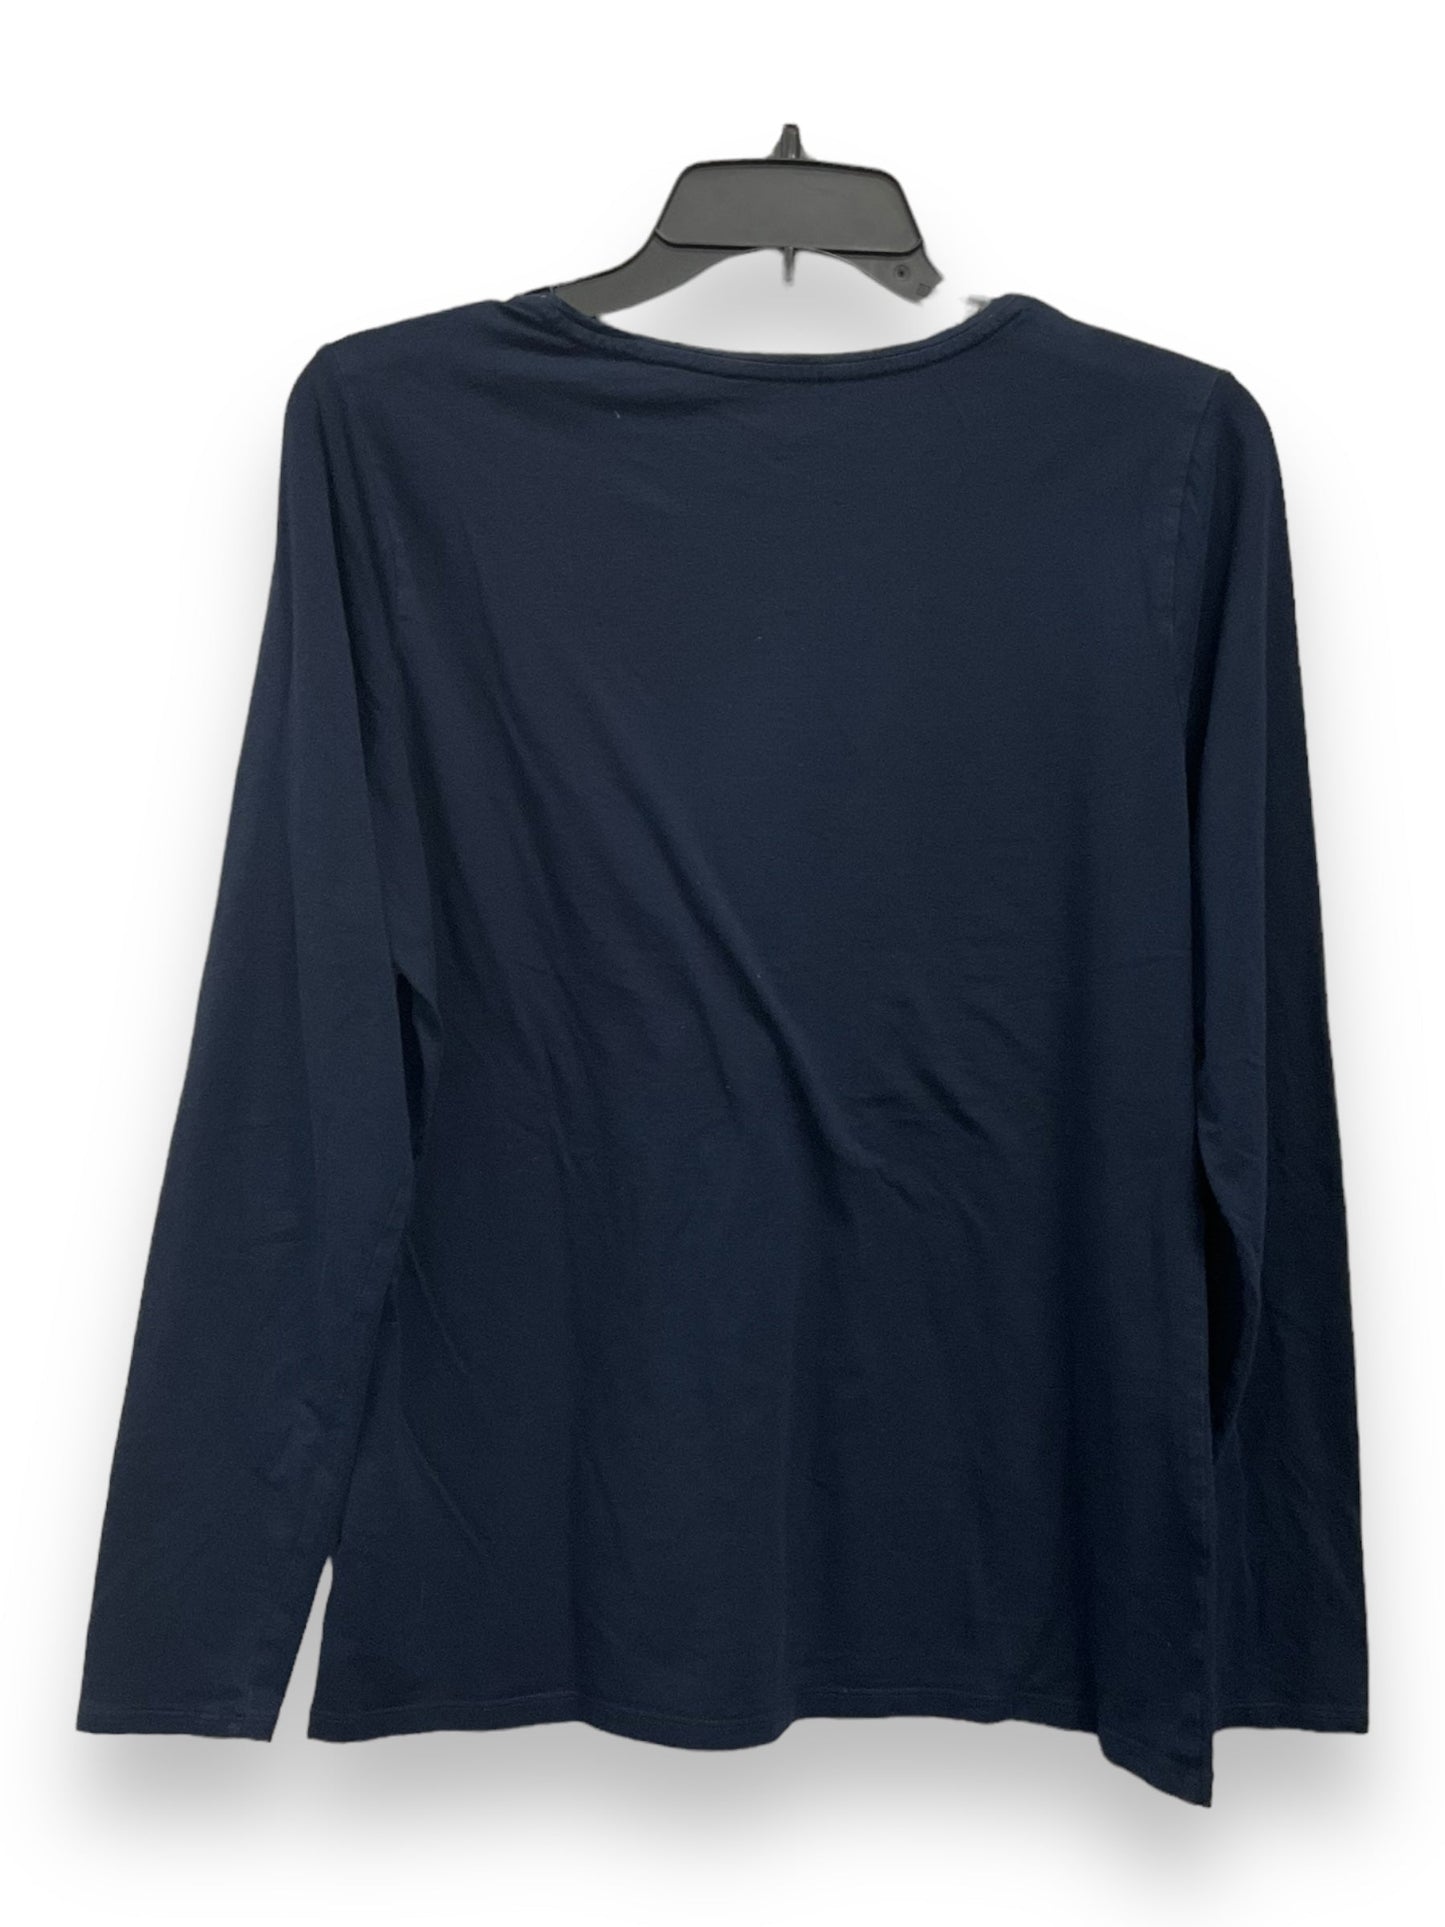 Navy Top Long Sleeve Basic Lands End, Size M